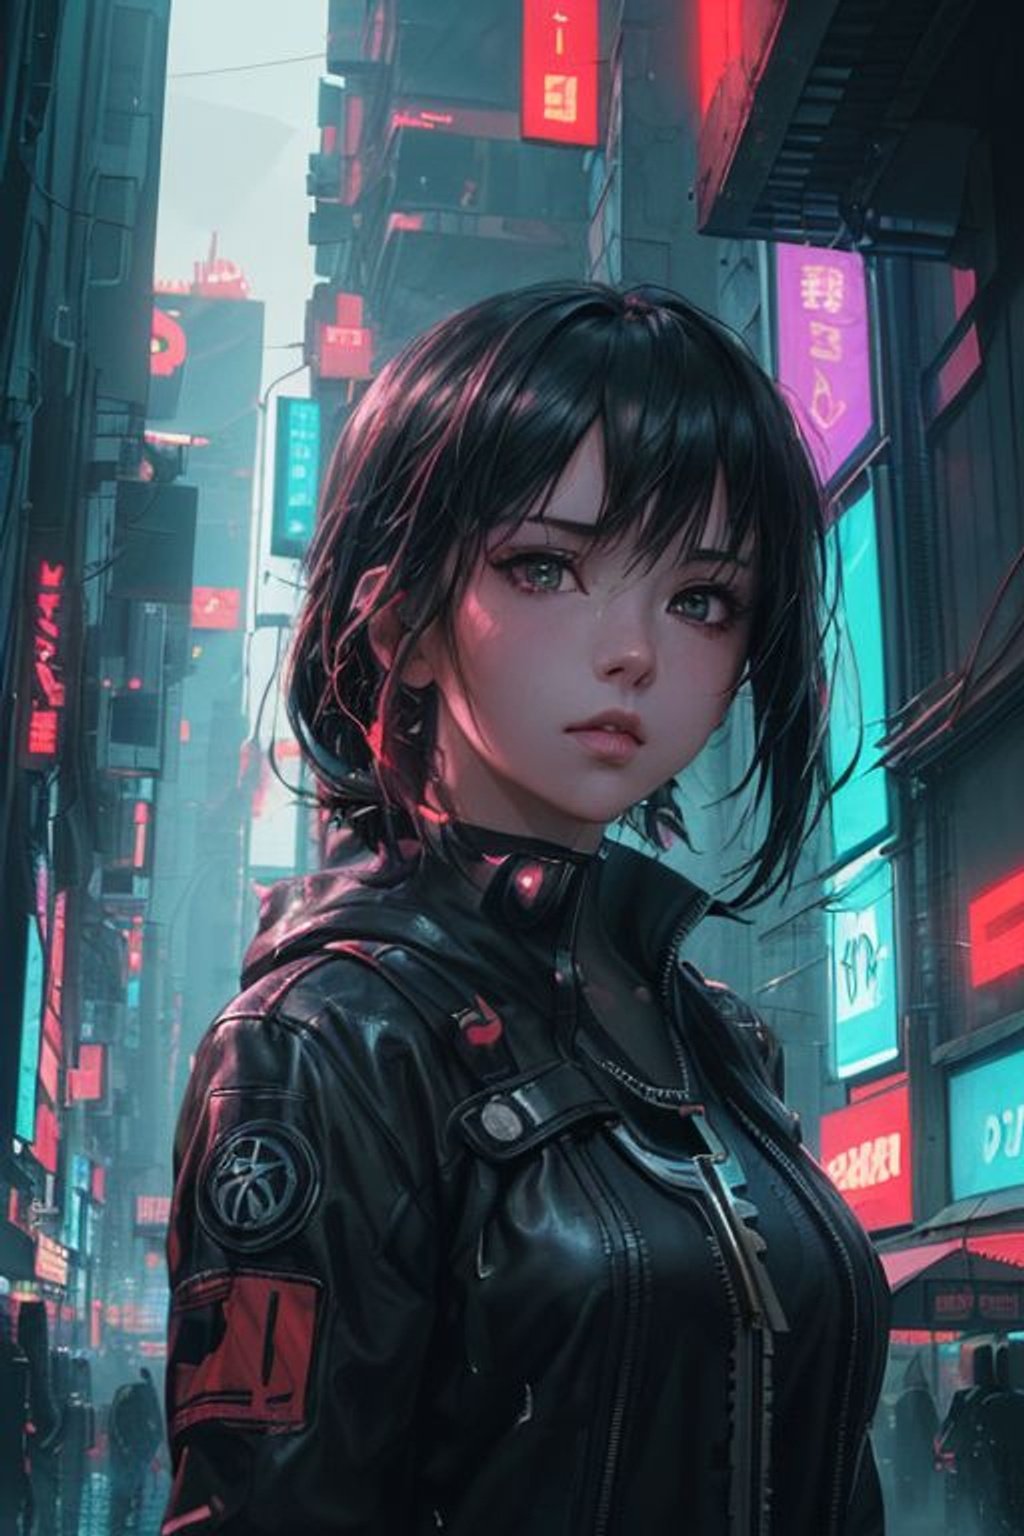 Prompt: ((Best quality)), ((masterpiece)), ((realistic)), Cyberpunk Street by Wlop, an anime key visual, depicting a bustling street in a futuristic cyberpunk city. The scene is immersed in a continuous rain, adding an atmospheric touch. The detailed background showcases a dynamic urban landscape, featuring towering skyscrapers, neon lights, and a warzone backdrop. The lighting is cinematic, creating a high contrast atmosphere with dramatic shadows. The artwork focuses on a beautiful detailed face with captivating eyes, portraying an anime girl with delicate features. The composition is framed from a dynamic angle, capturing the energy and vibrancy of the cyberpunk street. The artwork also incorporates a beautiful detailed glow, enhancing the futuristic aesthetic. Created by the renowned artist Wlop, this digital artwork is rendered using Unreal Engine, ensuring ultra-detailed 8K resolution. The color scheme is vibrant, with a focus on neon and cyberpunk aesthetics, contributing to the overall captivating ambiance. This key visual poster represents a true masterpiece in terms of its best quality and artistic execution